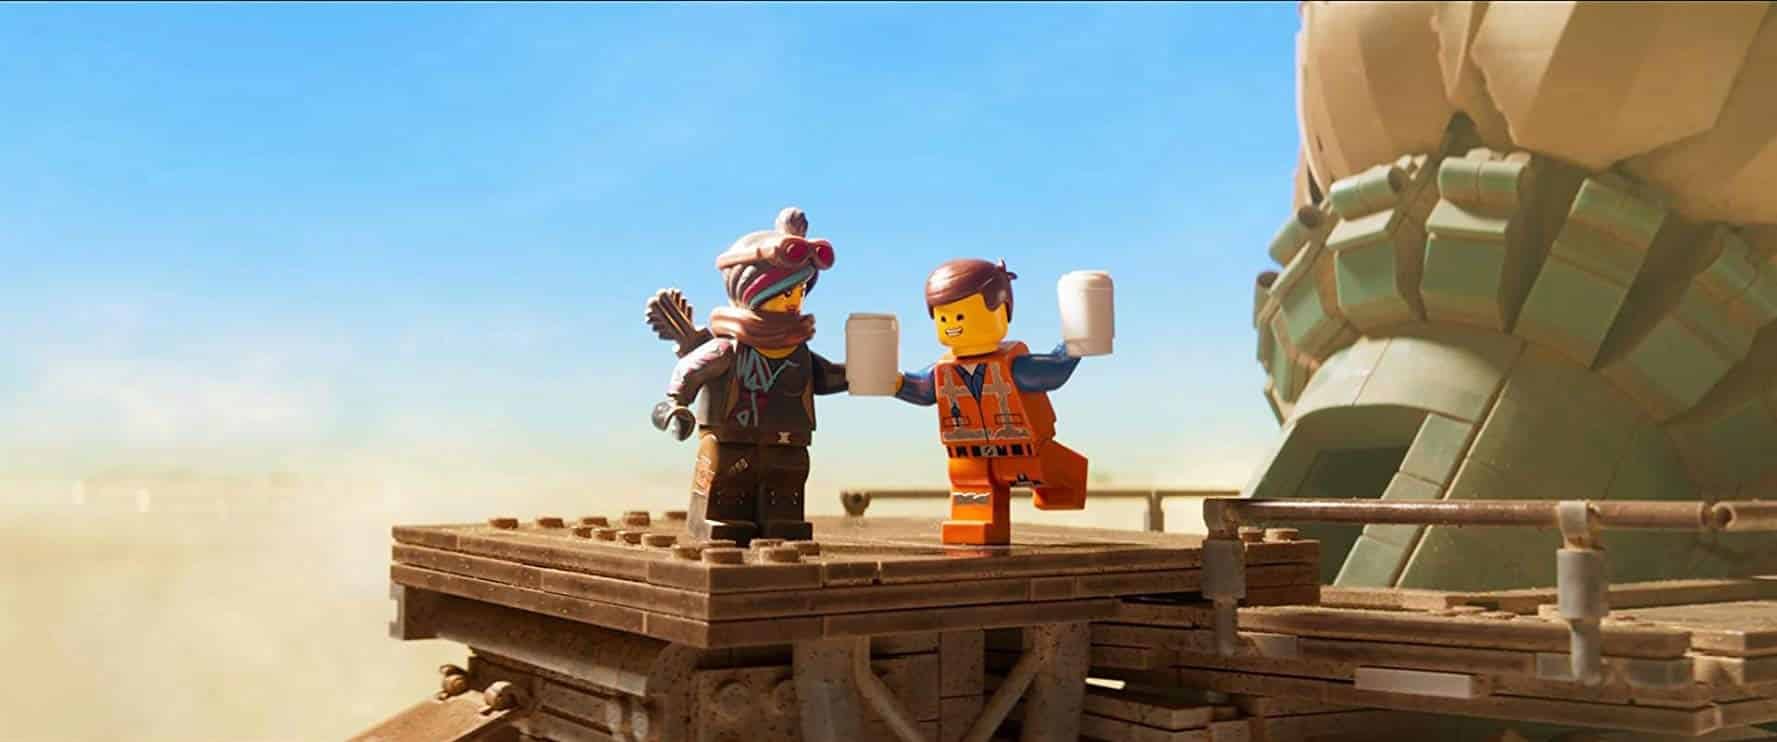 Universal Pictures and LEGO are in Talks for a Film Partnership